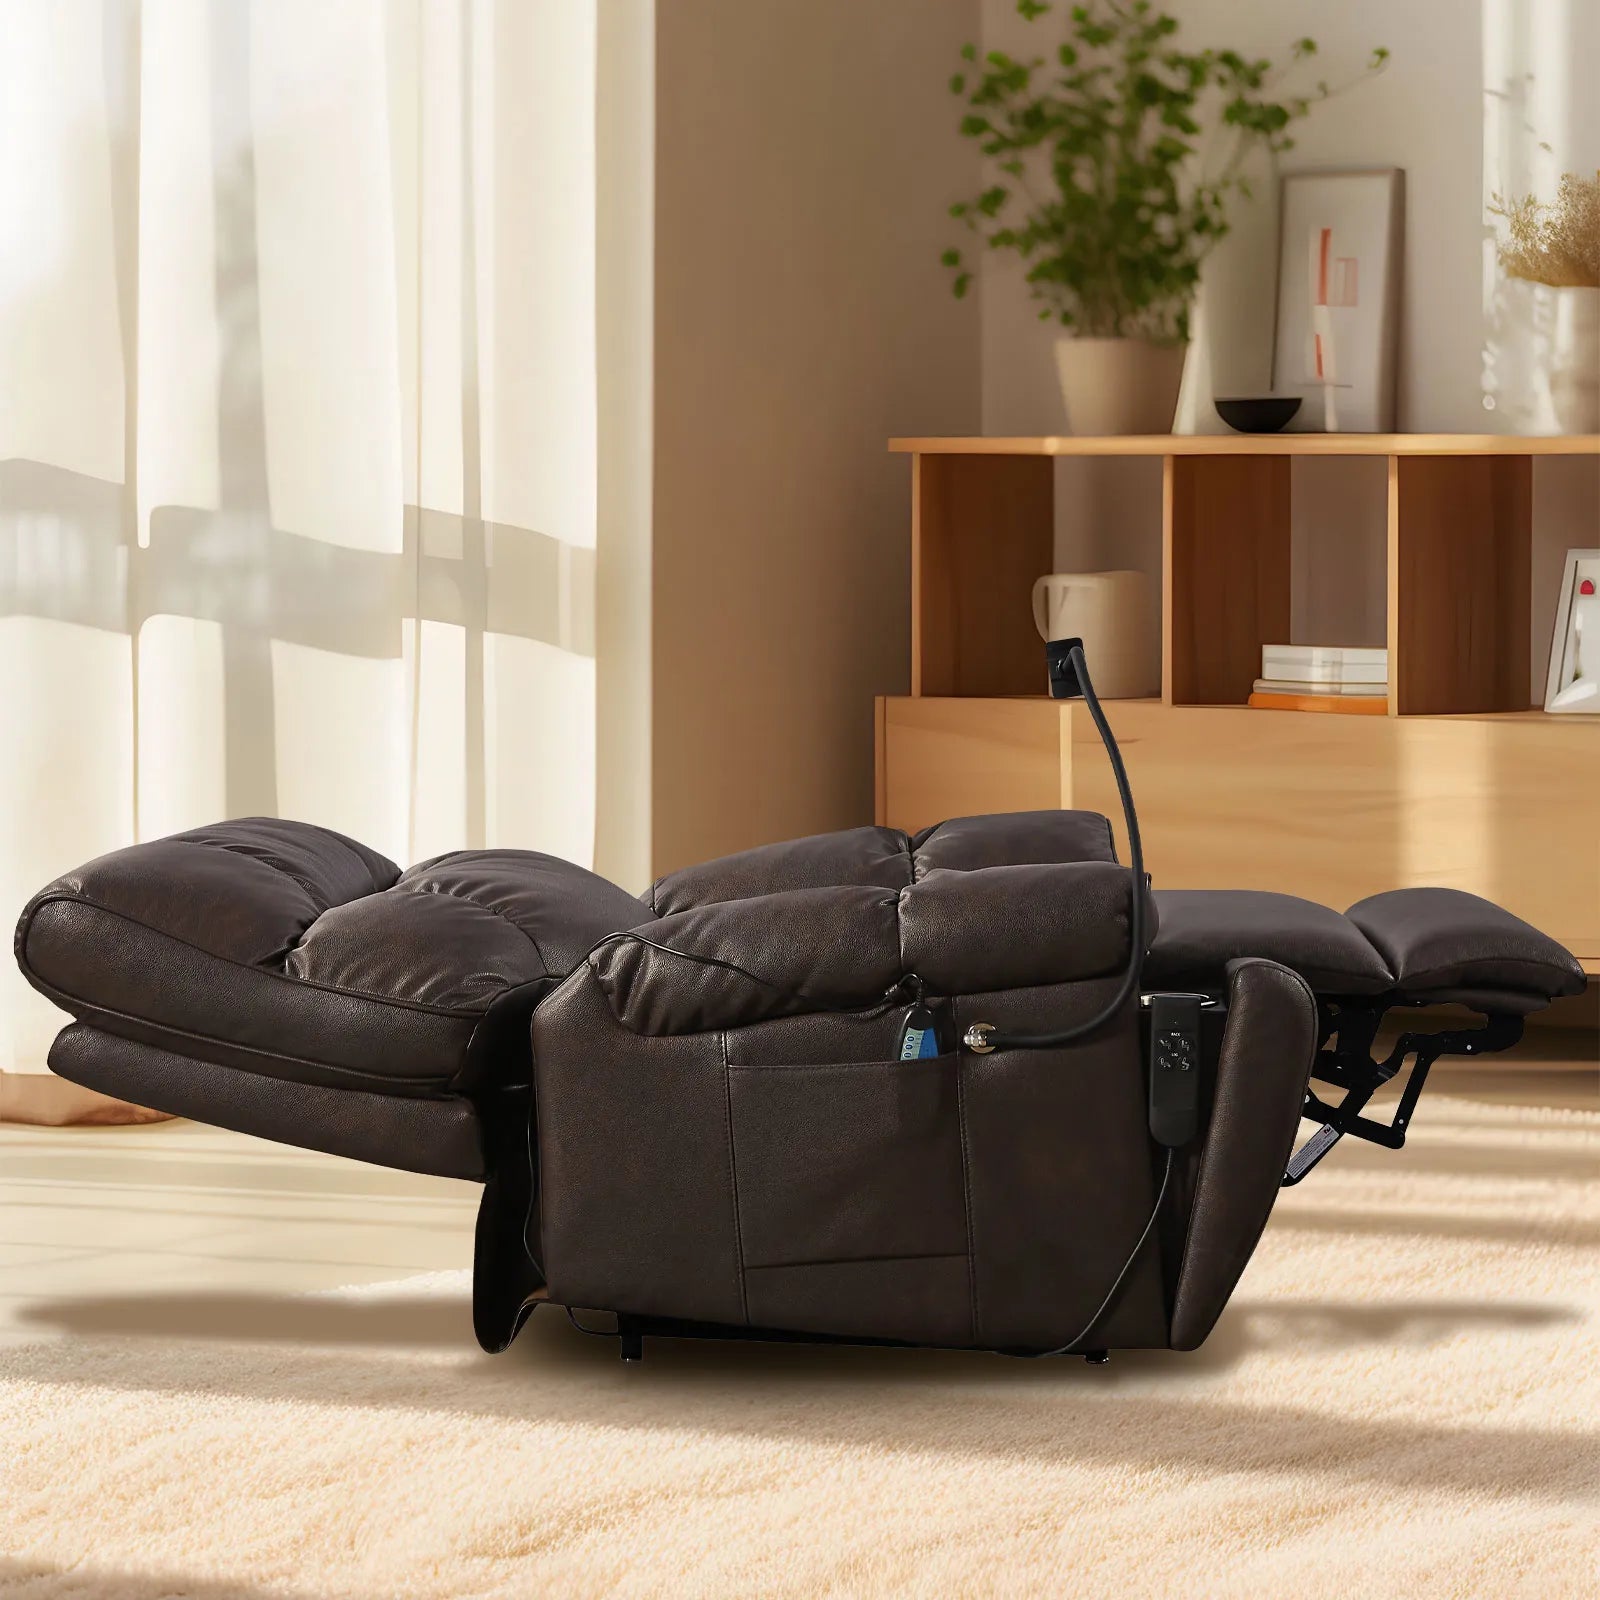 recliners that lay flat like a bed